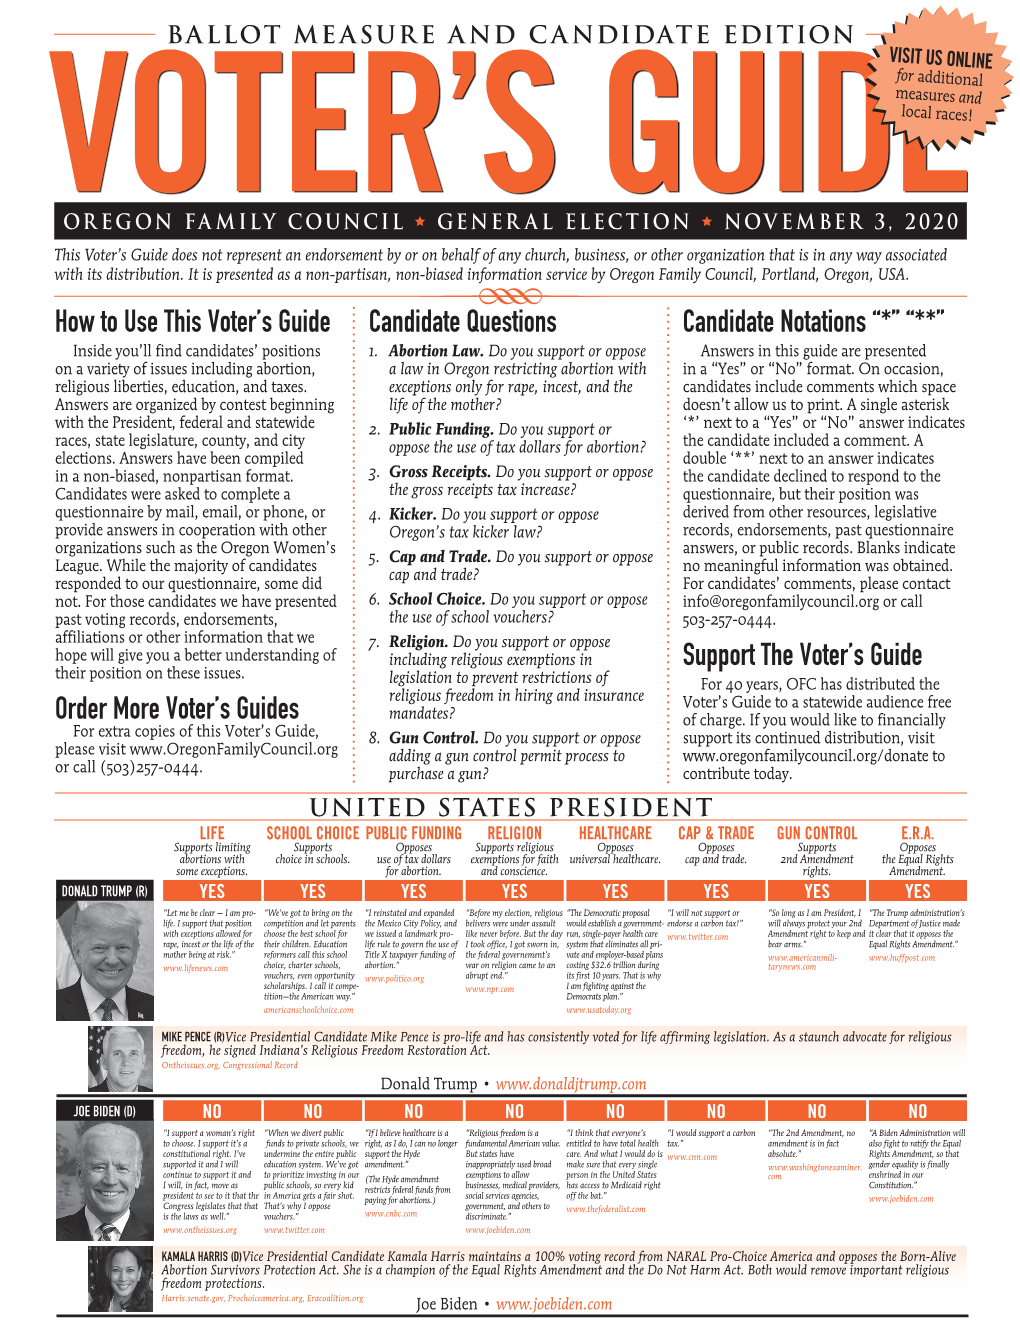 Support Or Oppose Answers in This Guide Are Presented on a Variety of Issues Including Abortion, a Law in Oregon Restricting Abortion with in a “Yes” Or “No” Format